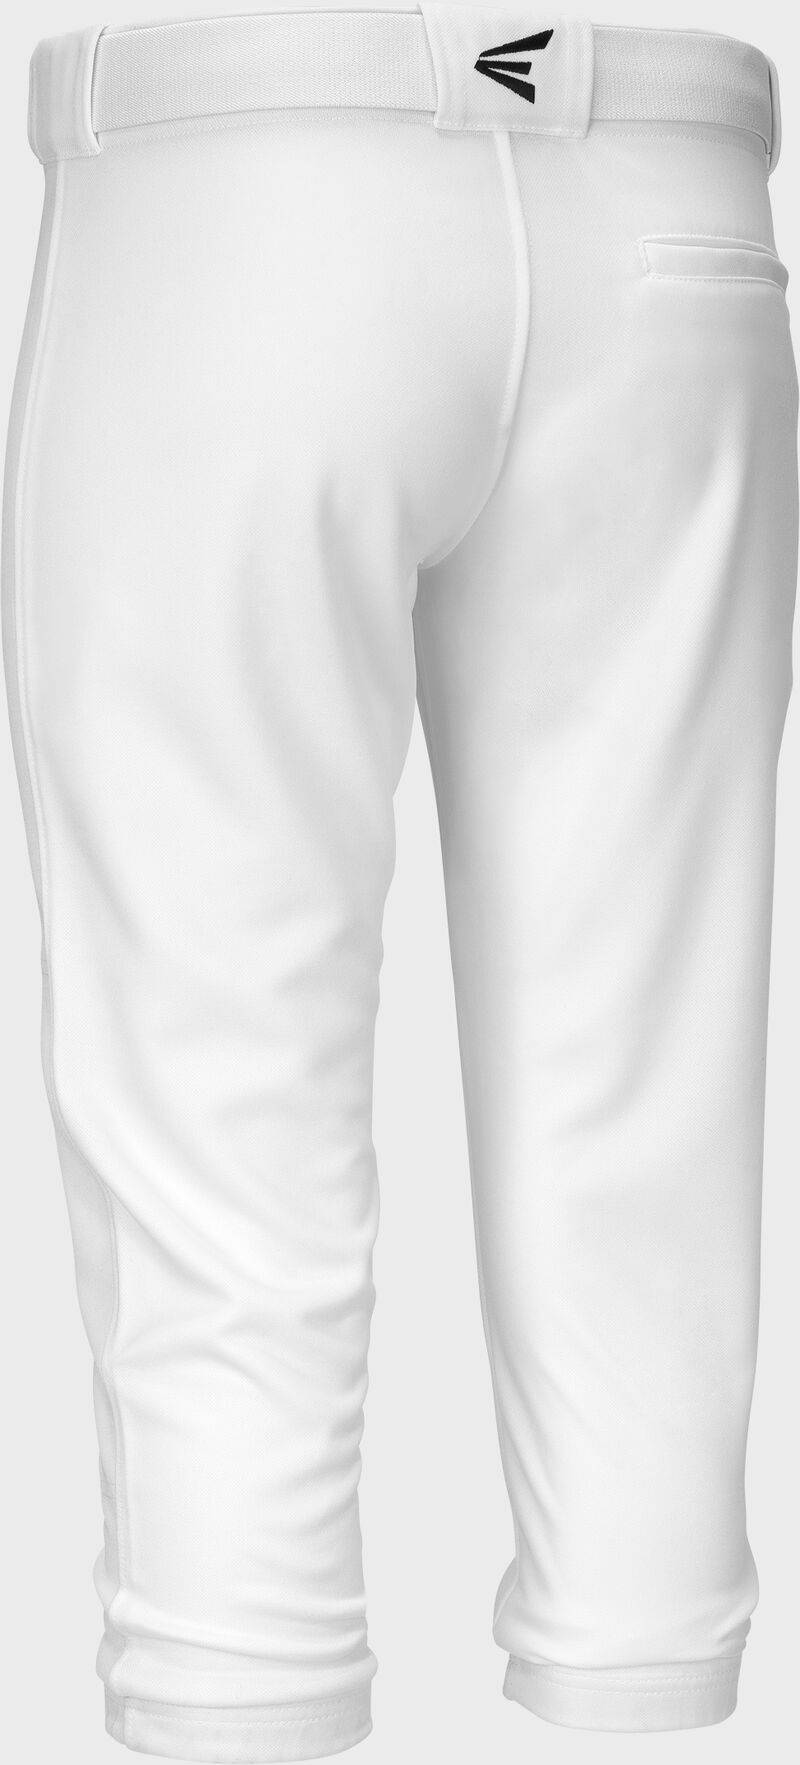 Load image into Gallery viewer, New Easton Zone2 Softball Pants White Size Small
